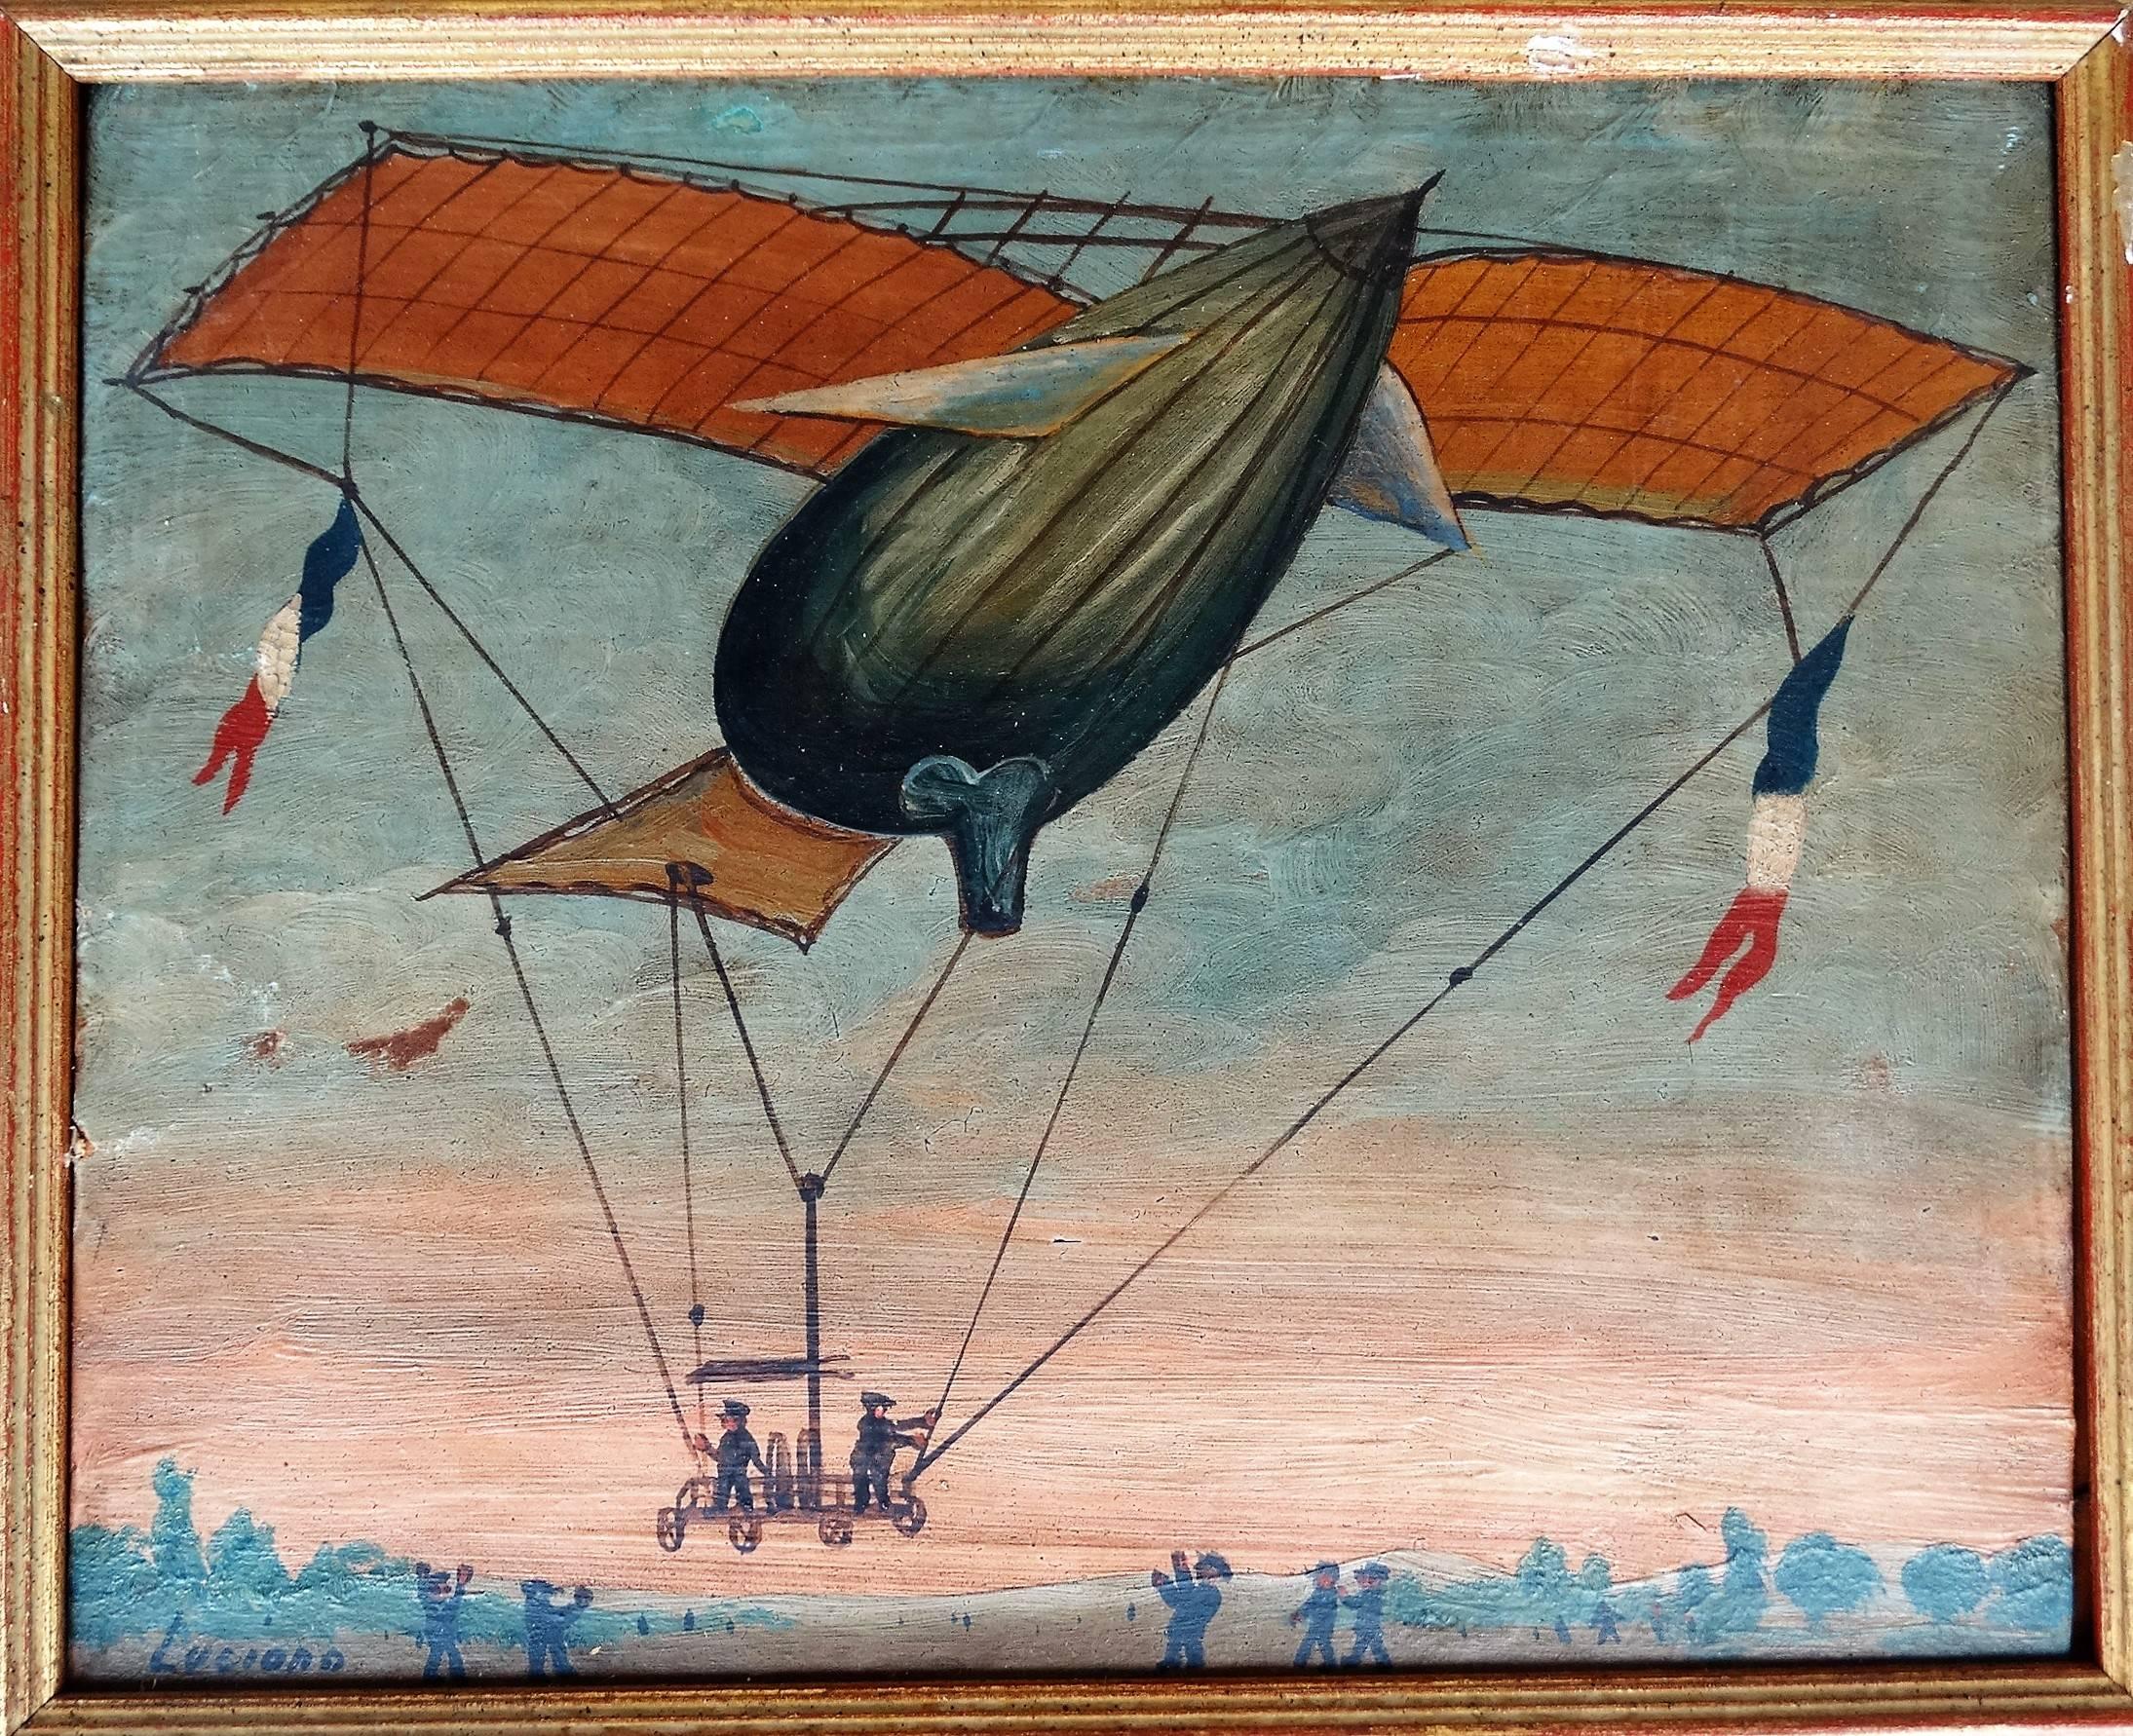 Hot Air Balloons  - Impressionist Painting by Hector Trotin and various artists 